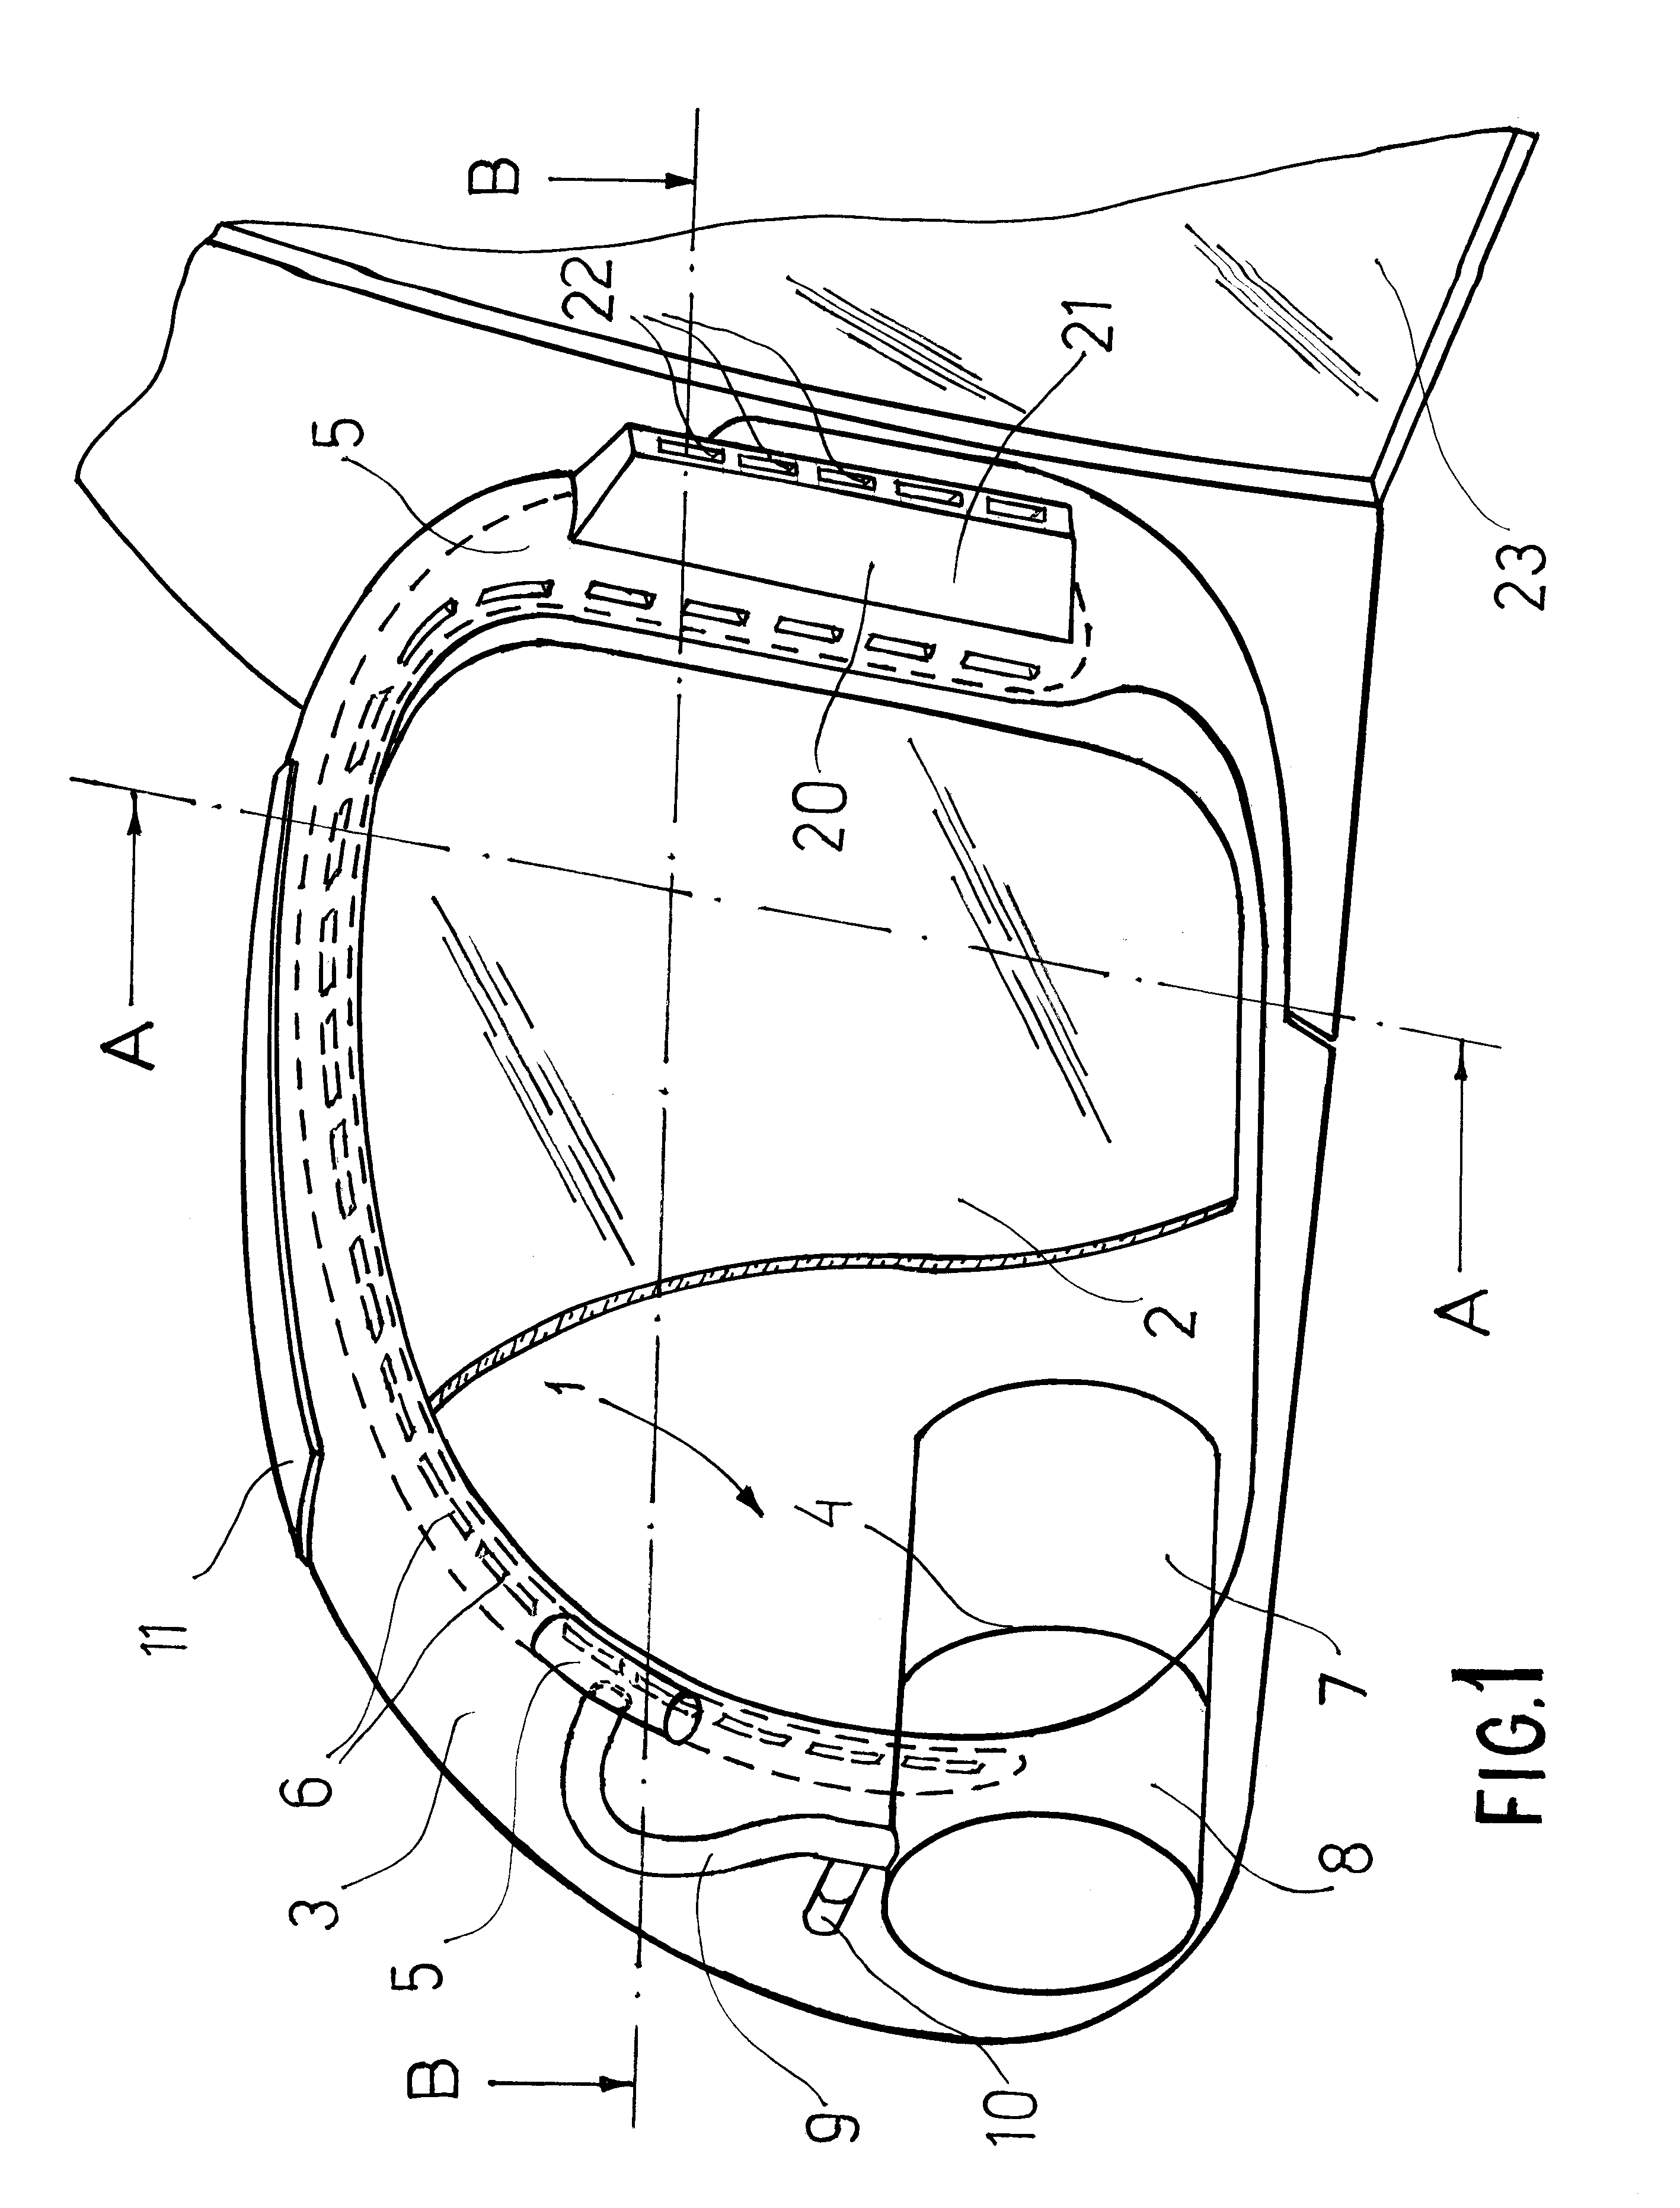 Universal clearing air system for windows and external mirrors of a vehicle